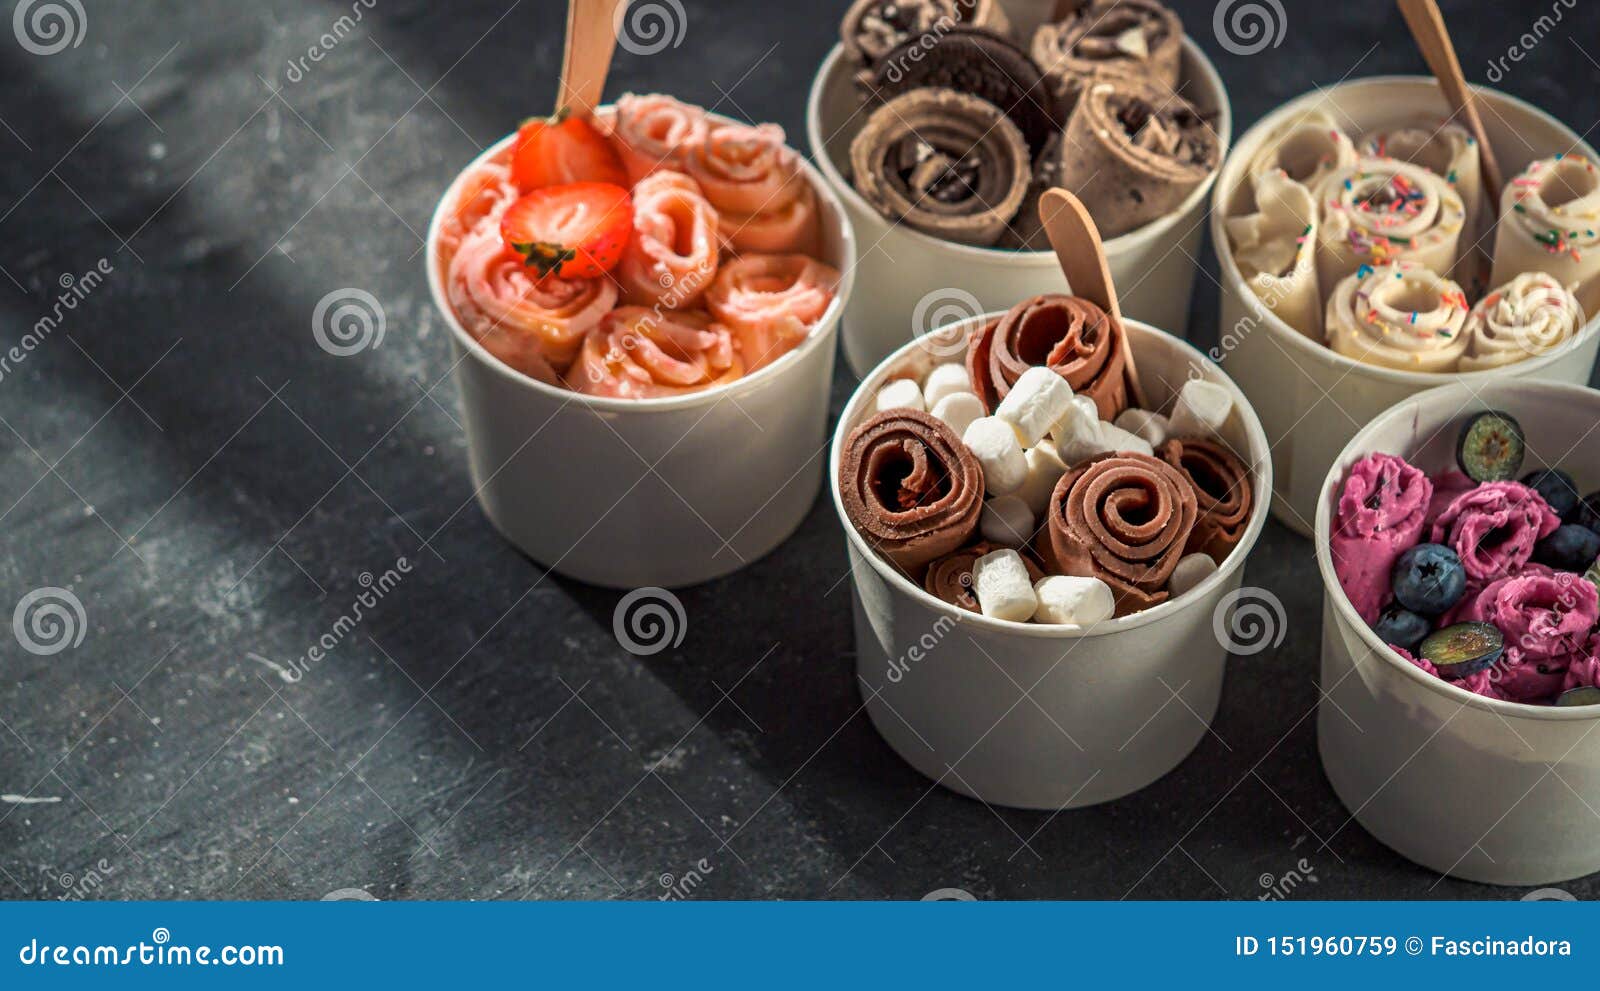 rolled ice creams in cone cups on dark background